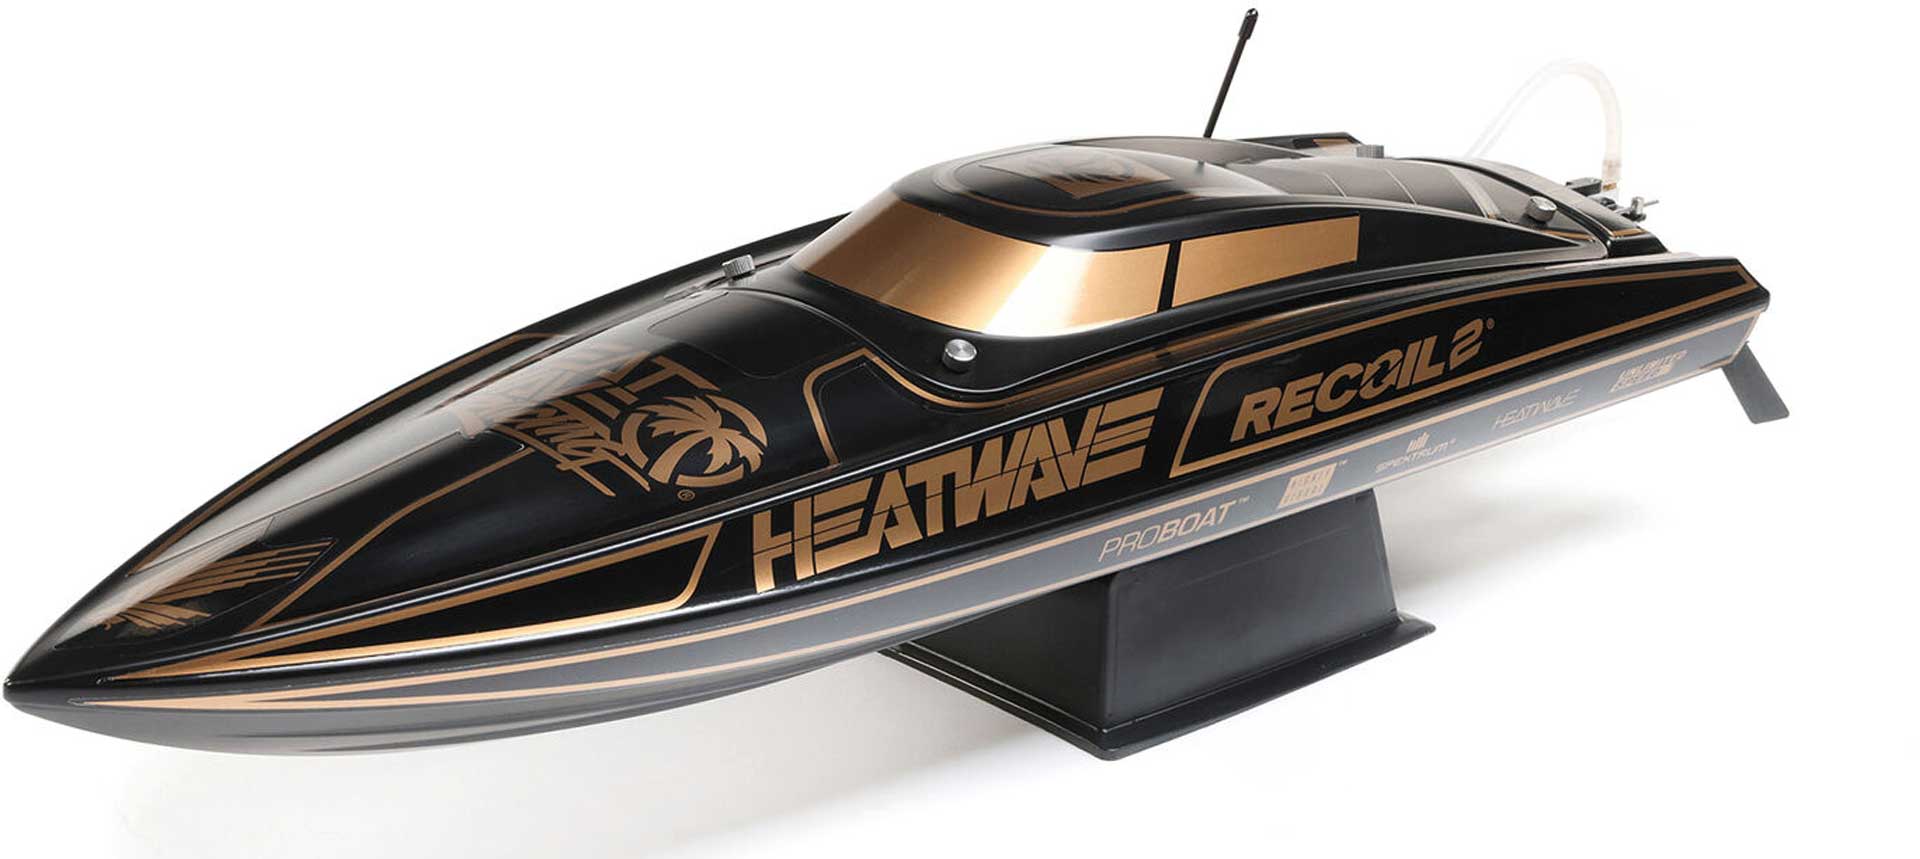 PROBOAT Heatwave Recoil 2 26" Self-Righting, Brushless RTR